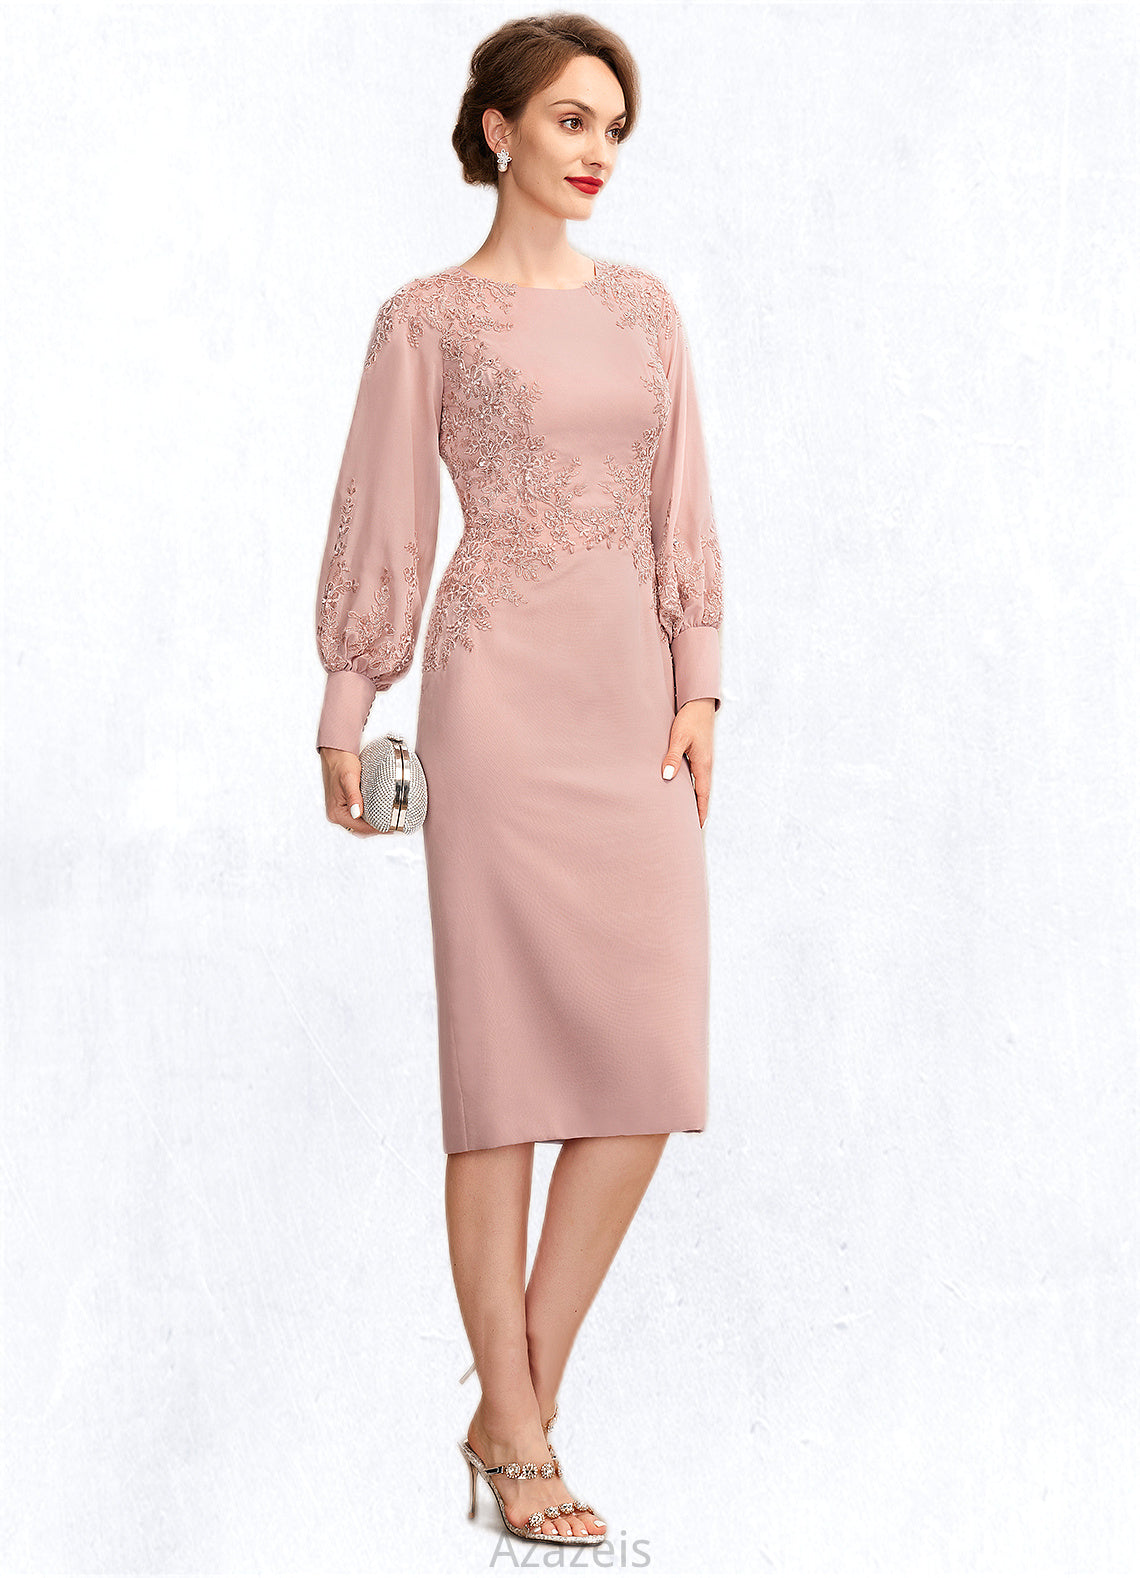 Val Sheath/Column Scoop Neck Knee-Length Chiffon Lace Mother of the Bride Dress With Beading Sequins DF126P0015020